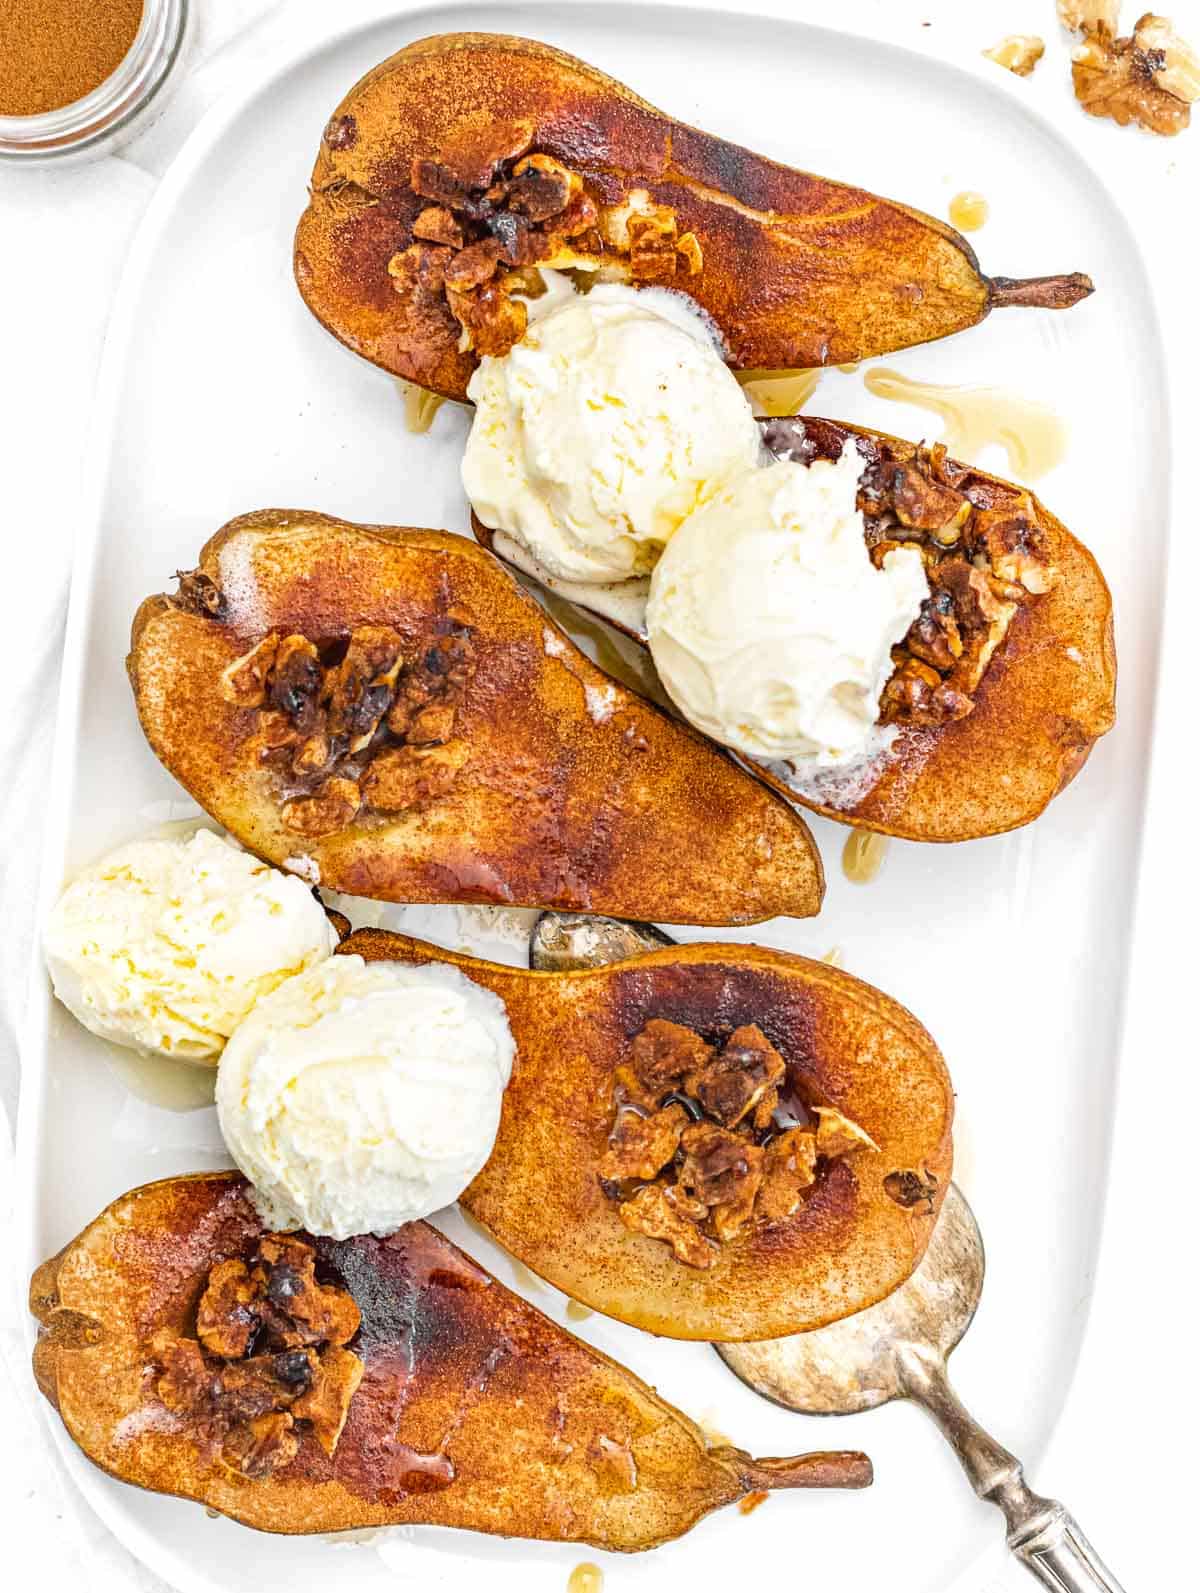 baked pears with cinnamon and vanilla ice cream